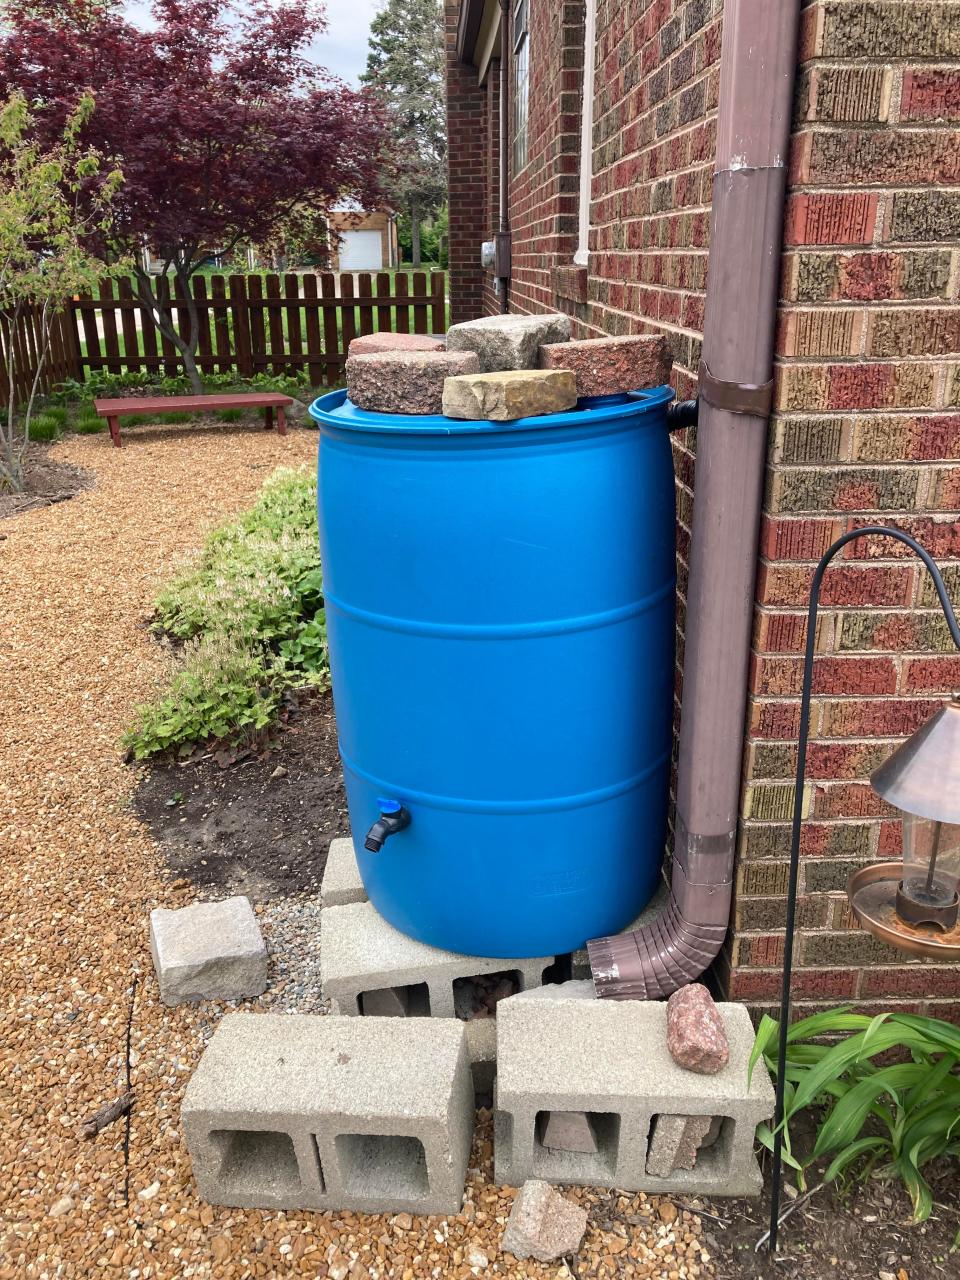 John Hazlett, with the Marion County Soil and Water Conservation District, connected his rain barrel to the side of his downspout with a valve that switches back to the downspout for the overflow. The downspout then conveys overflow to his rain garden full of native plants. Most other barrels will have the overflow on the side of the barrel.